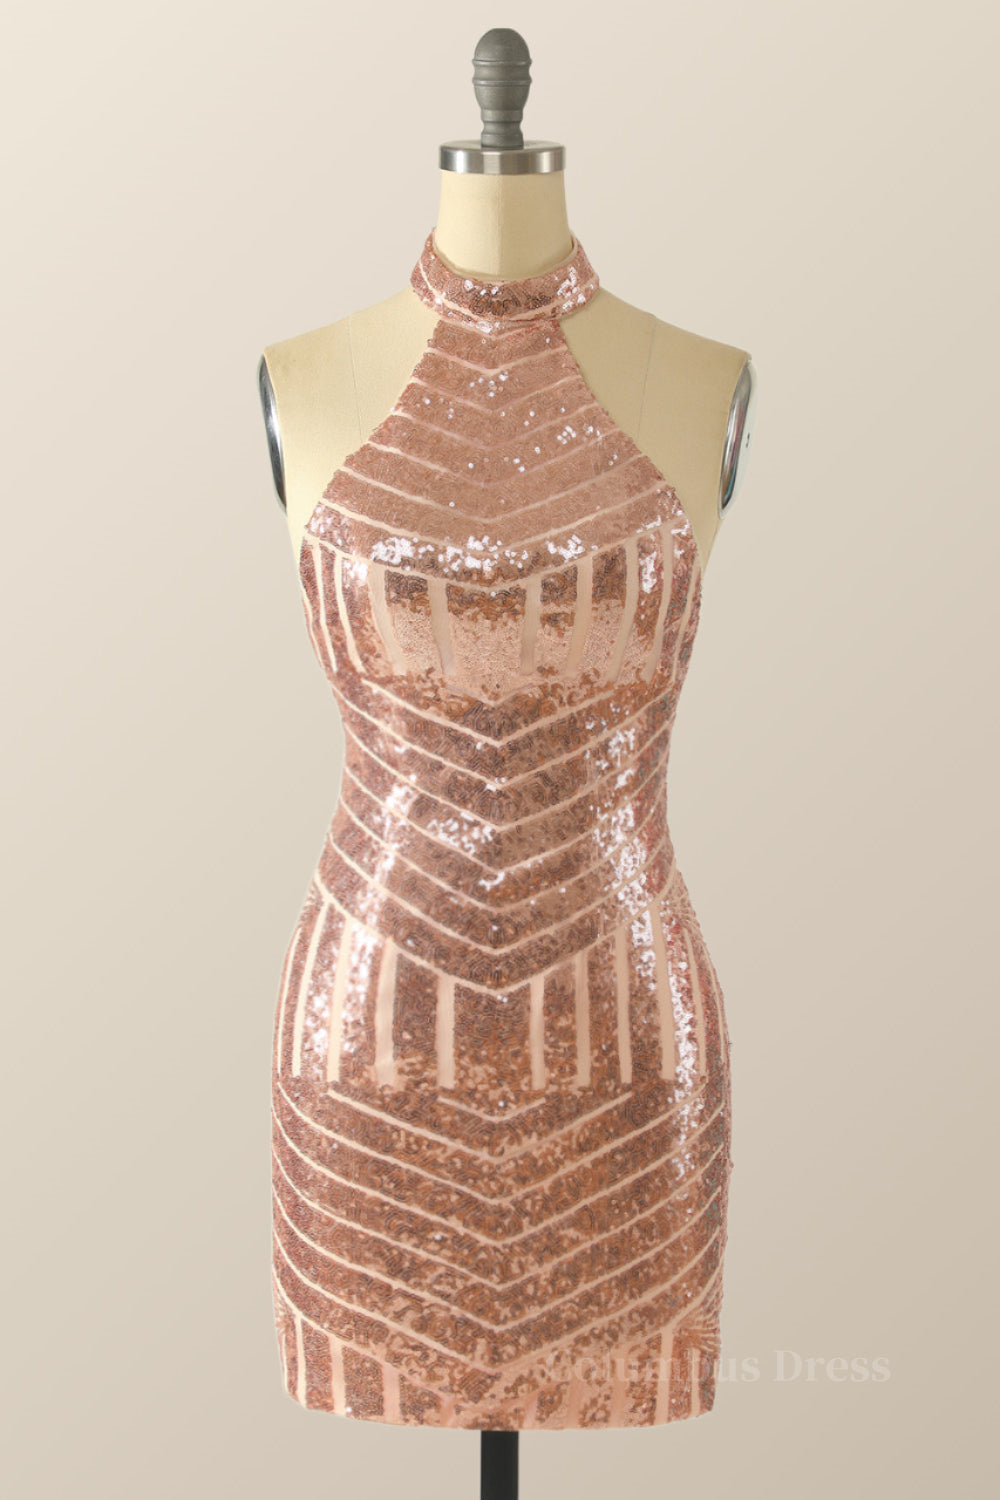 Homecoming Dress Sparkle, High Neck Rose Gold Sequin Tight Mini Dress